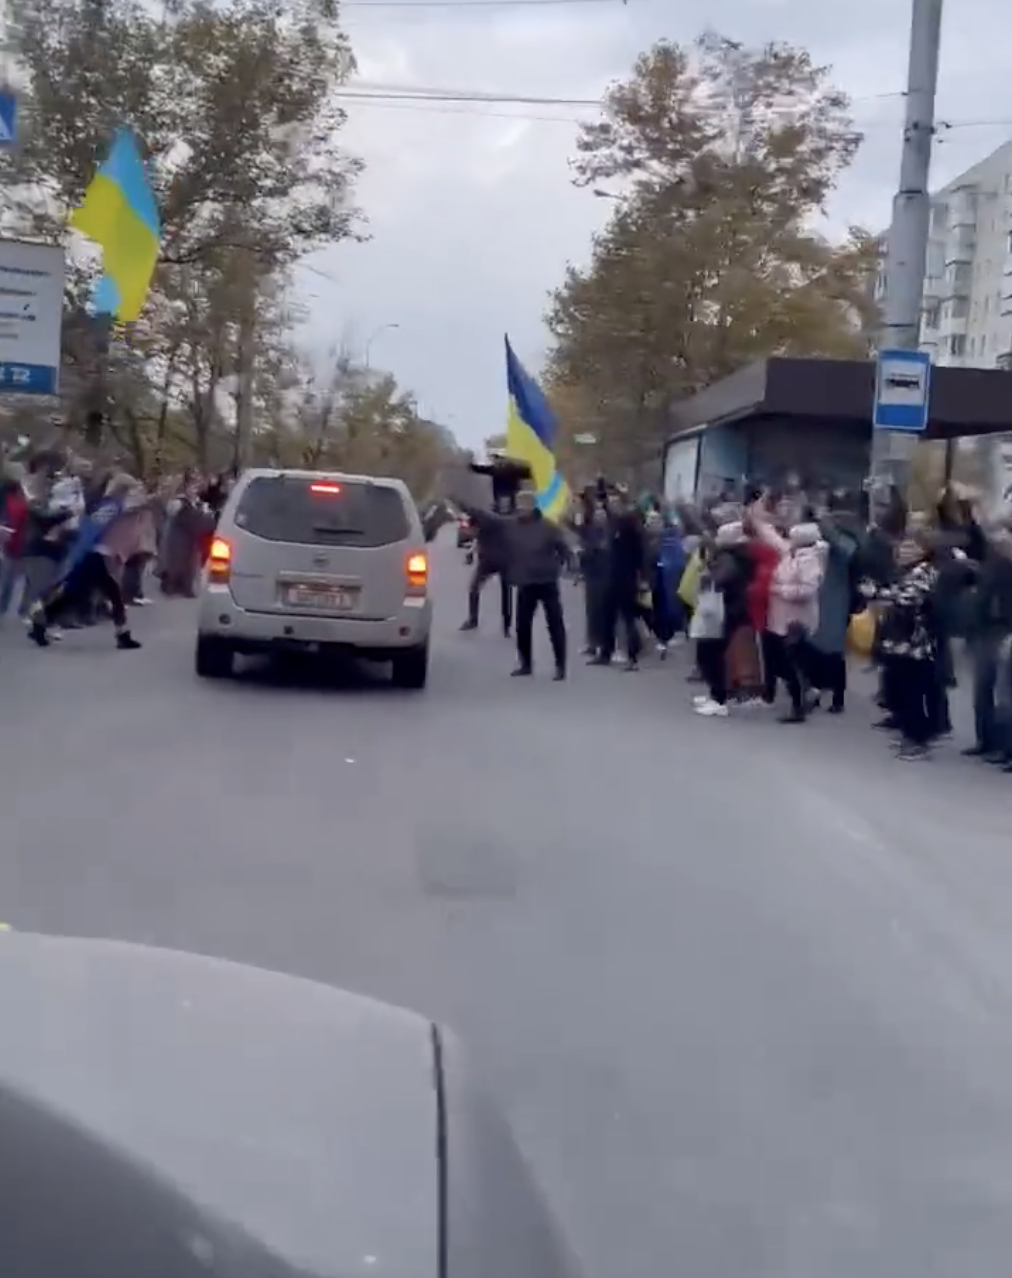 Crowds welcome special troops in free Kherson, Nov 2022